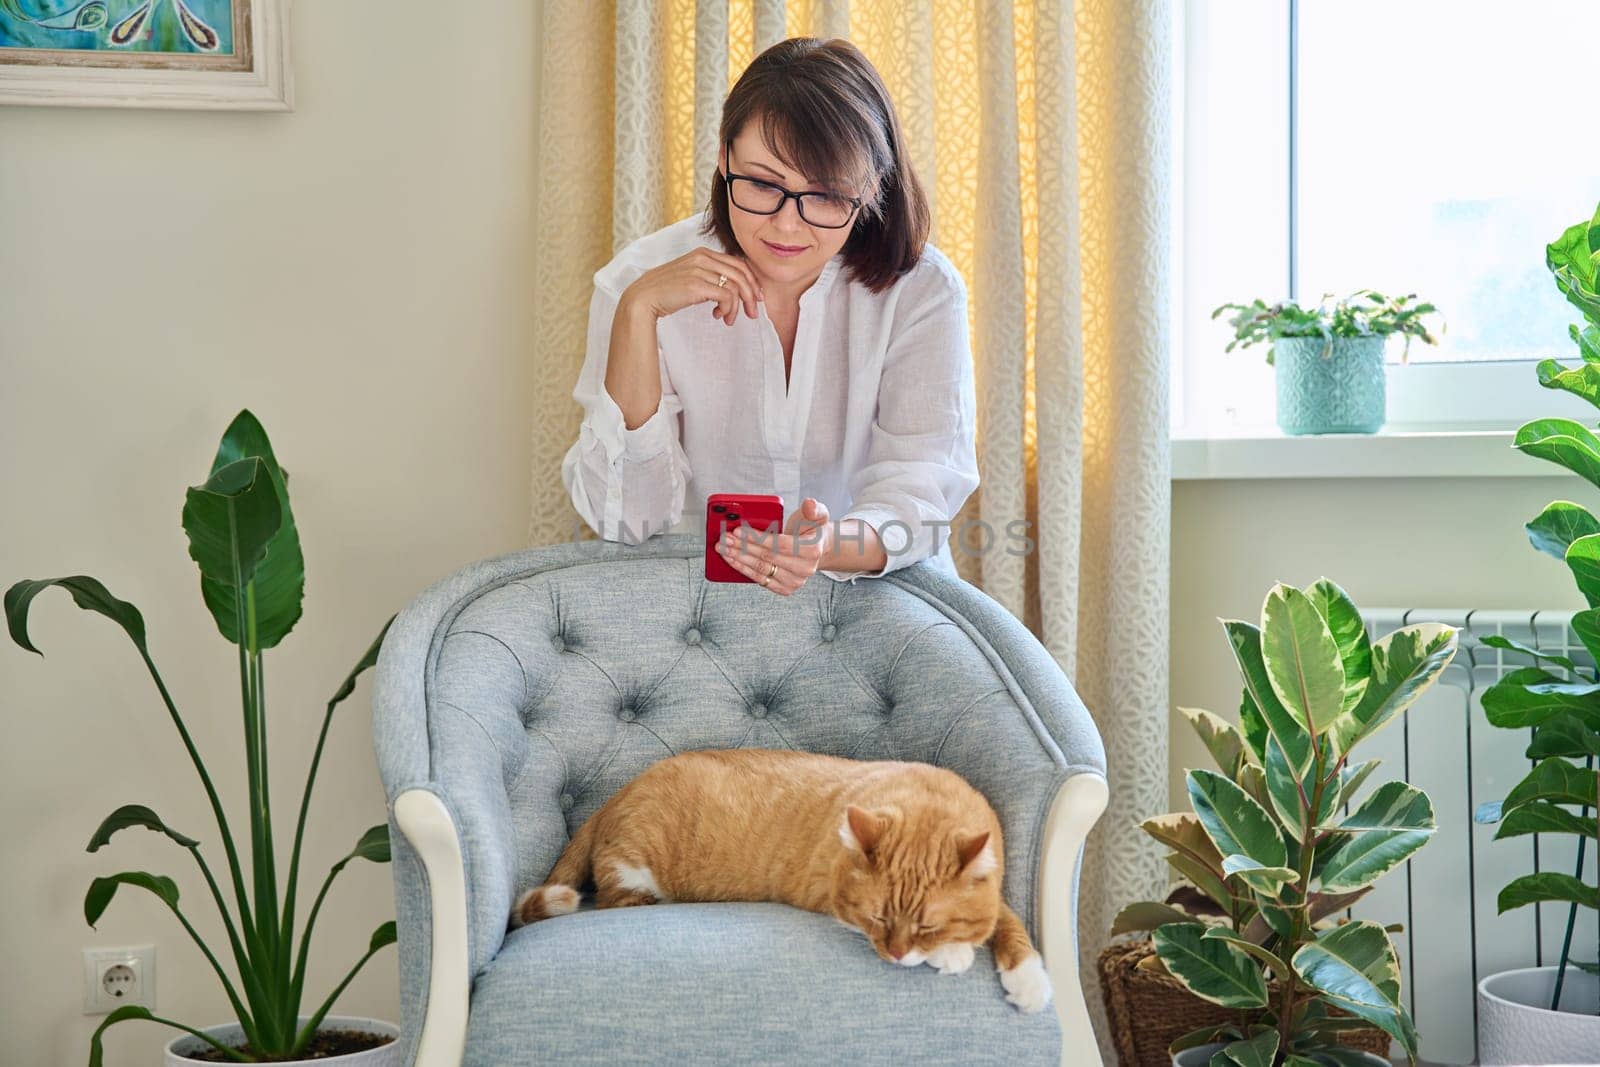 Middle aged woman using smartphone, in home interior with sleeping cat on armchair, houseplants. Lifestyle, comfort, green pets people animals concept